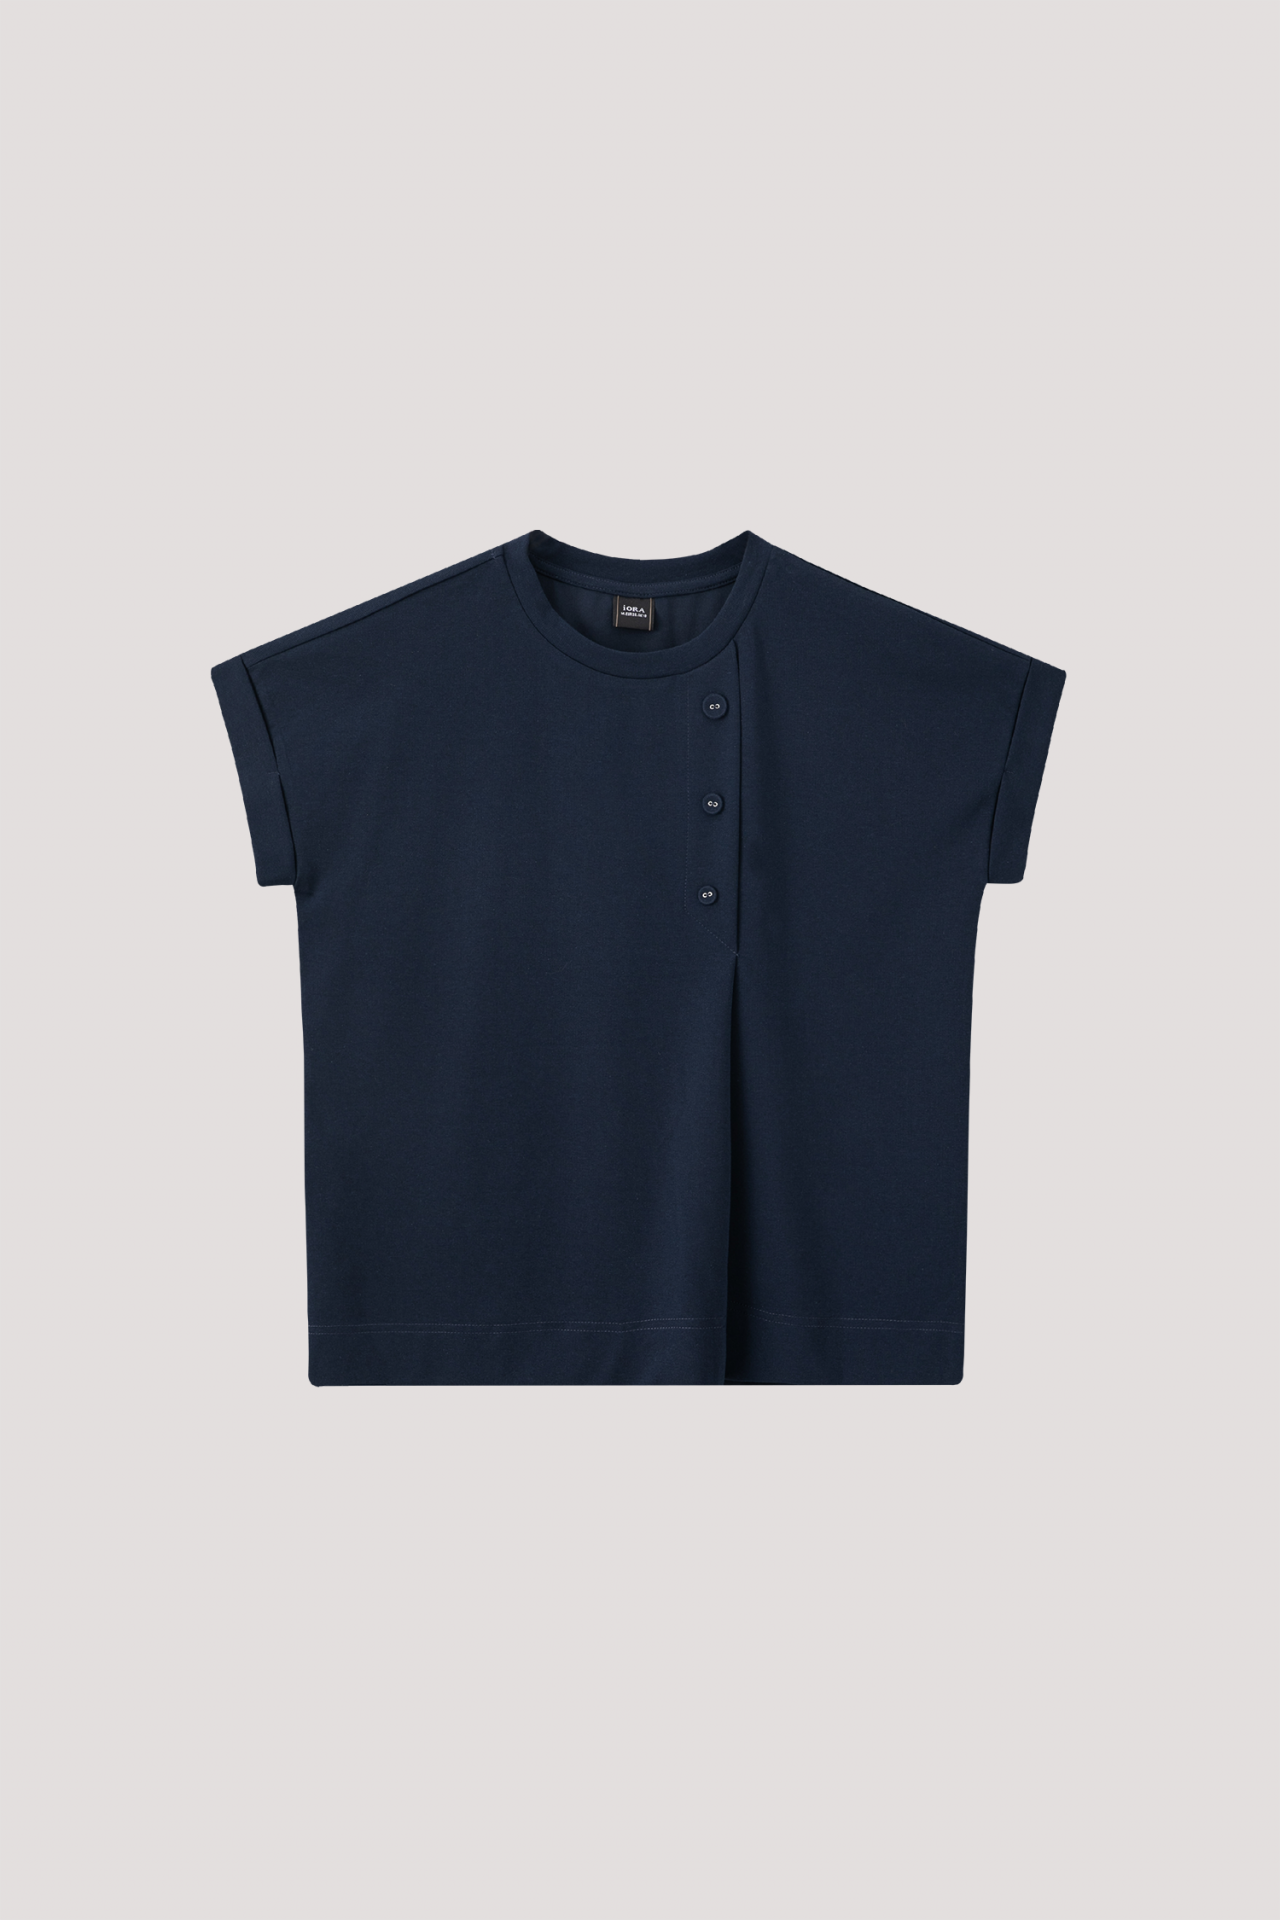 AT 9100 BUTTON ON CHEST TOP NAVY